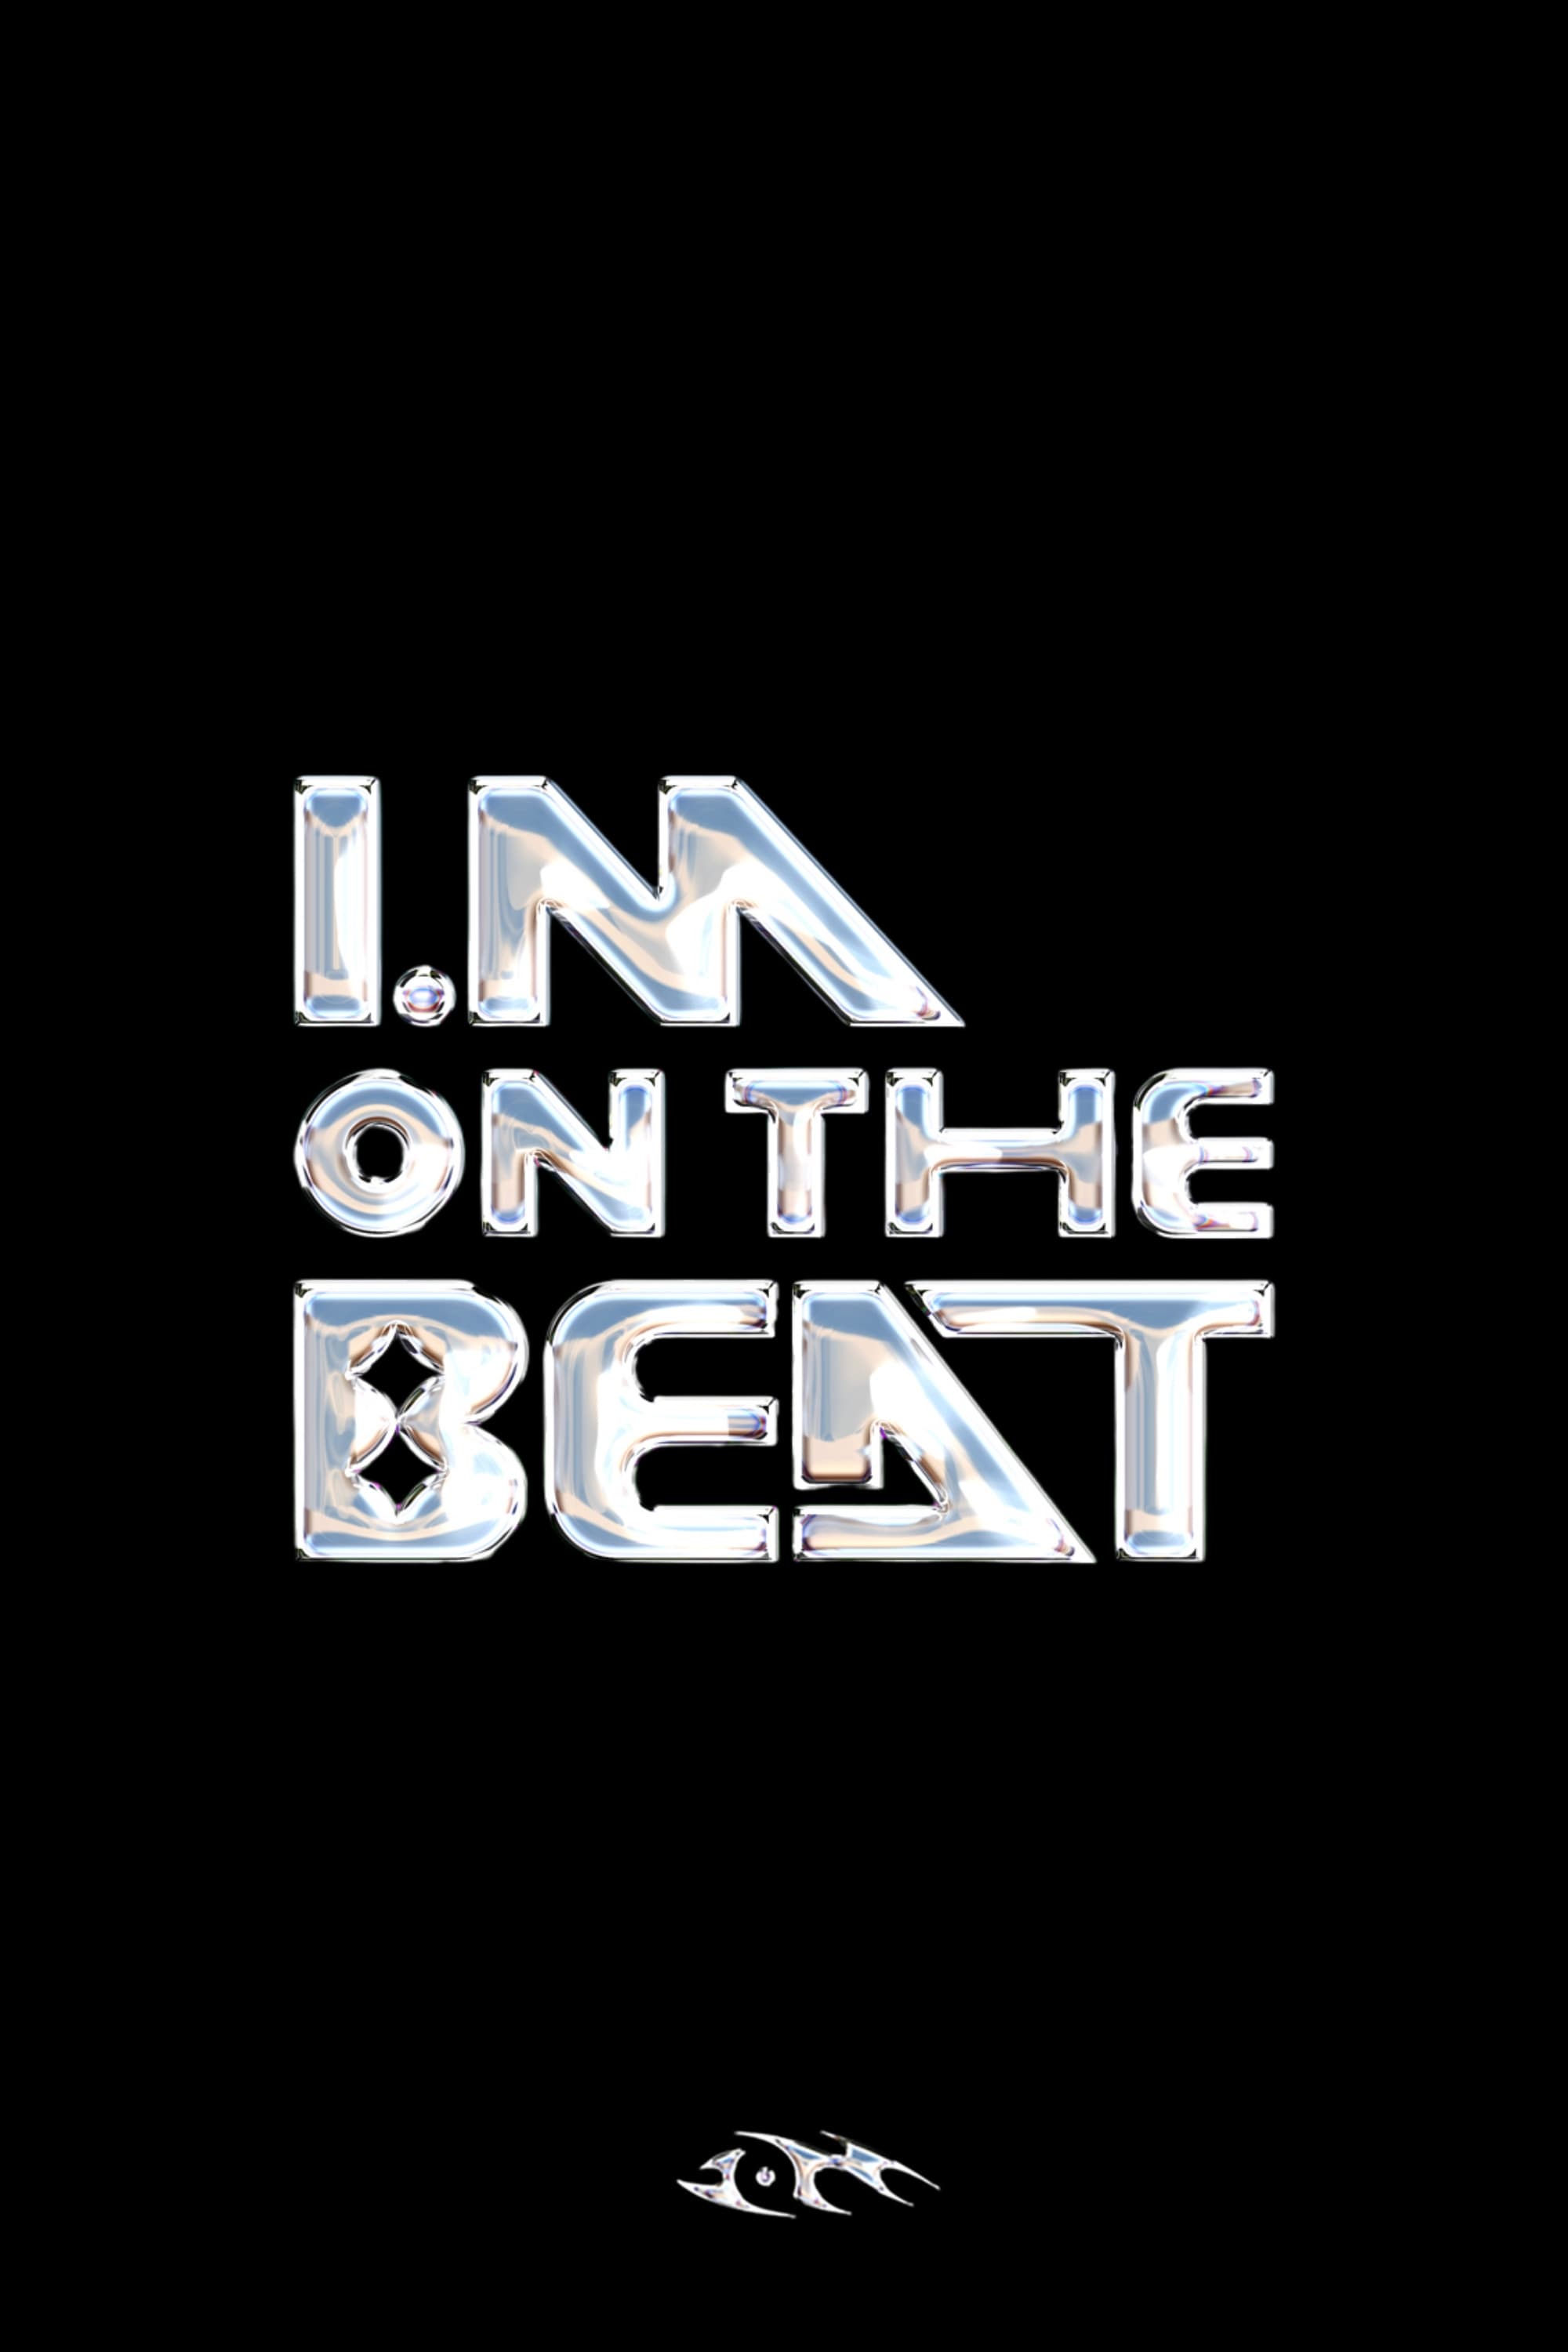 I.M ON THE BEAT